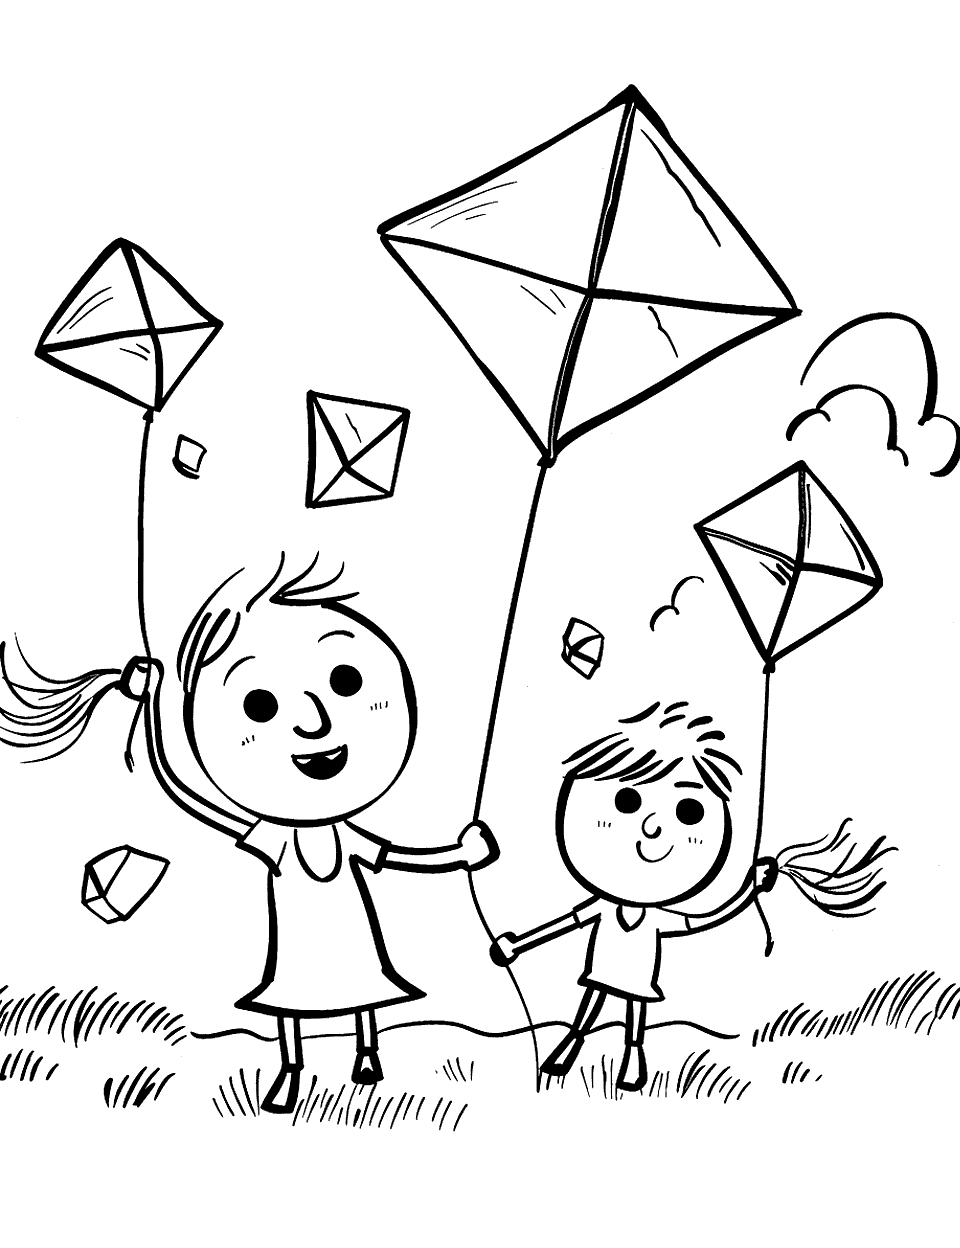 Diamond Kites Shapes Coloring Page - Kids flying kites shaped like diamonds, with long tails fluttering in the wind.